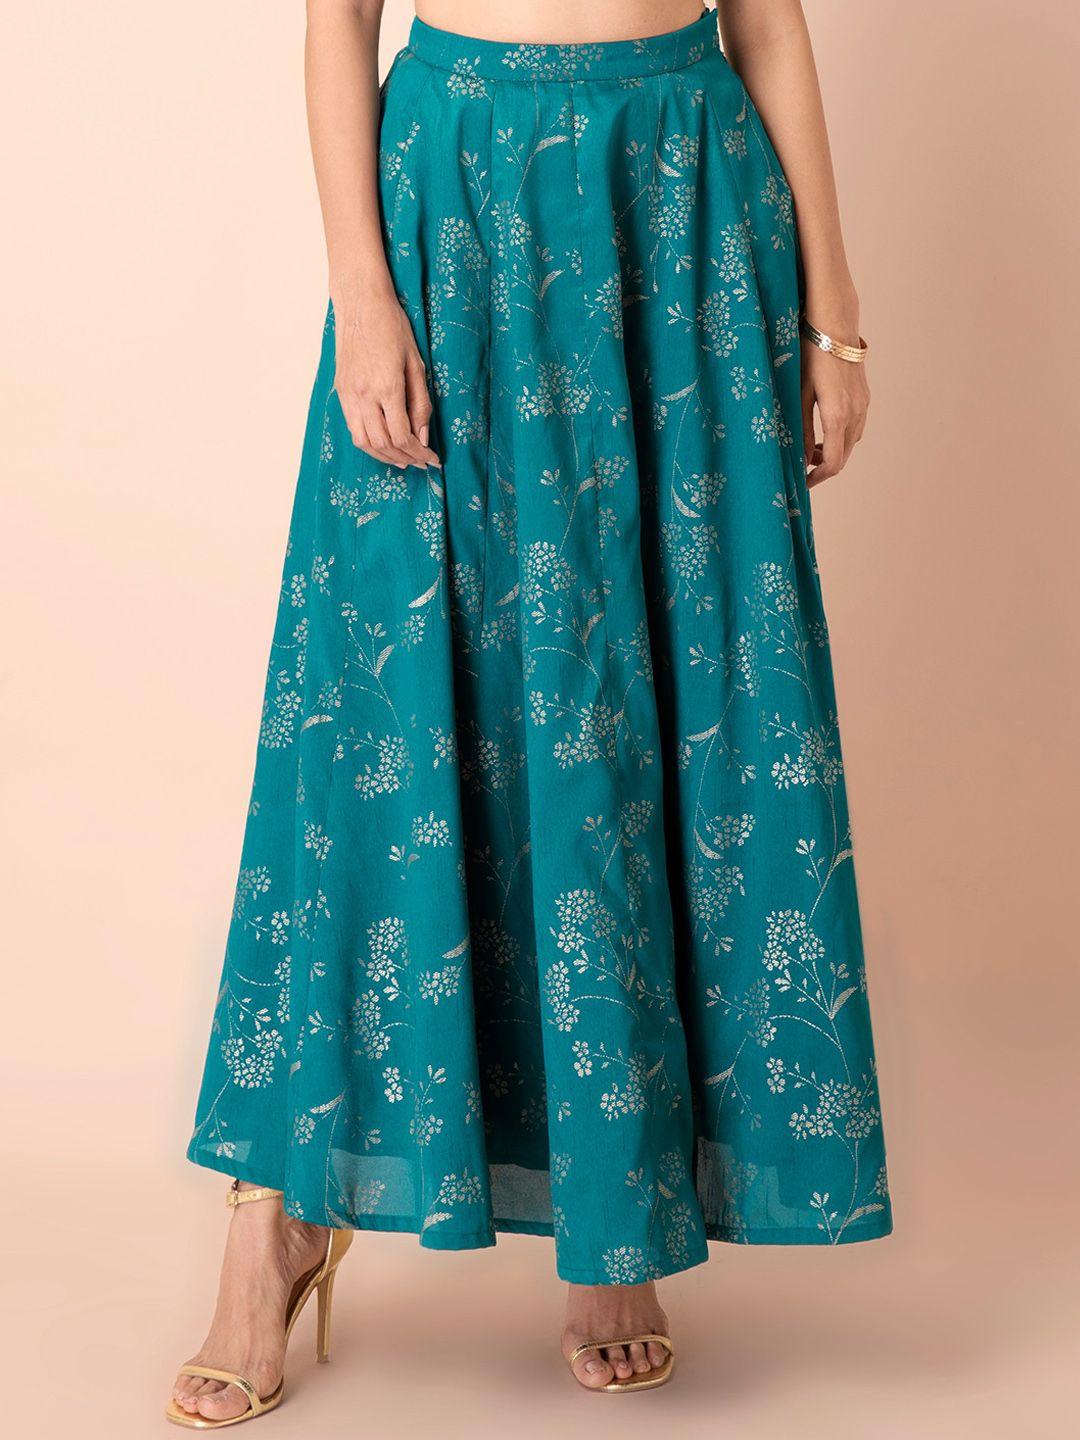 INDYA Women Teal Blue & Silver-Coloured Foil Printed Flared Maxi Skirt